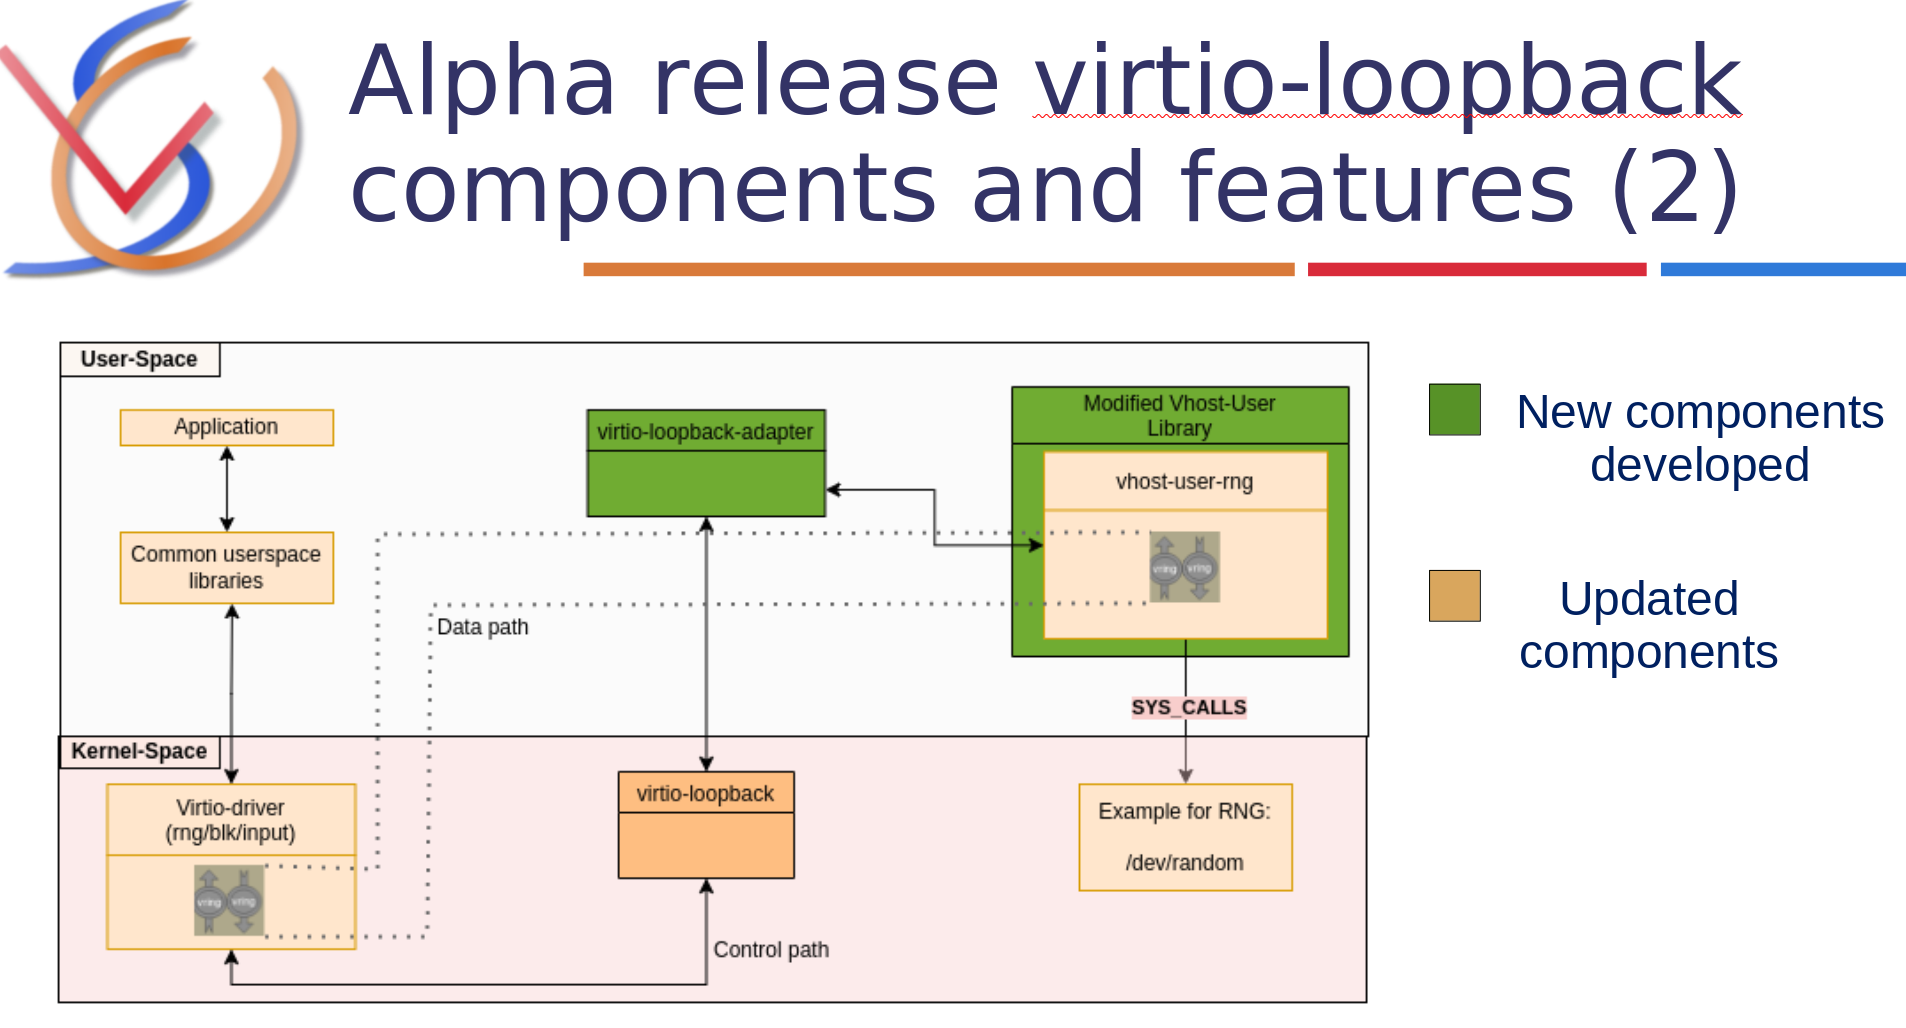 virtio-loopback implements full virtio applications portability between native systems and hypervisors